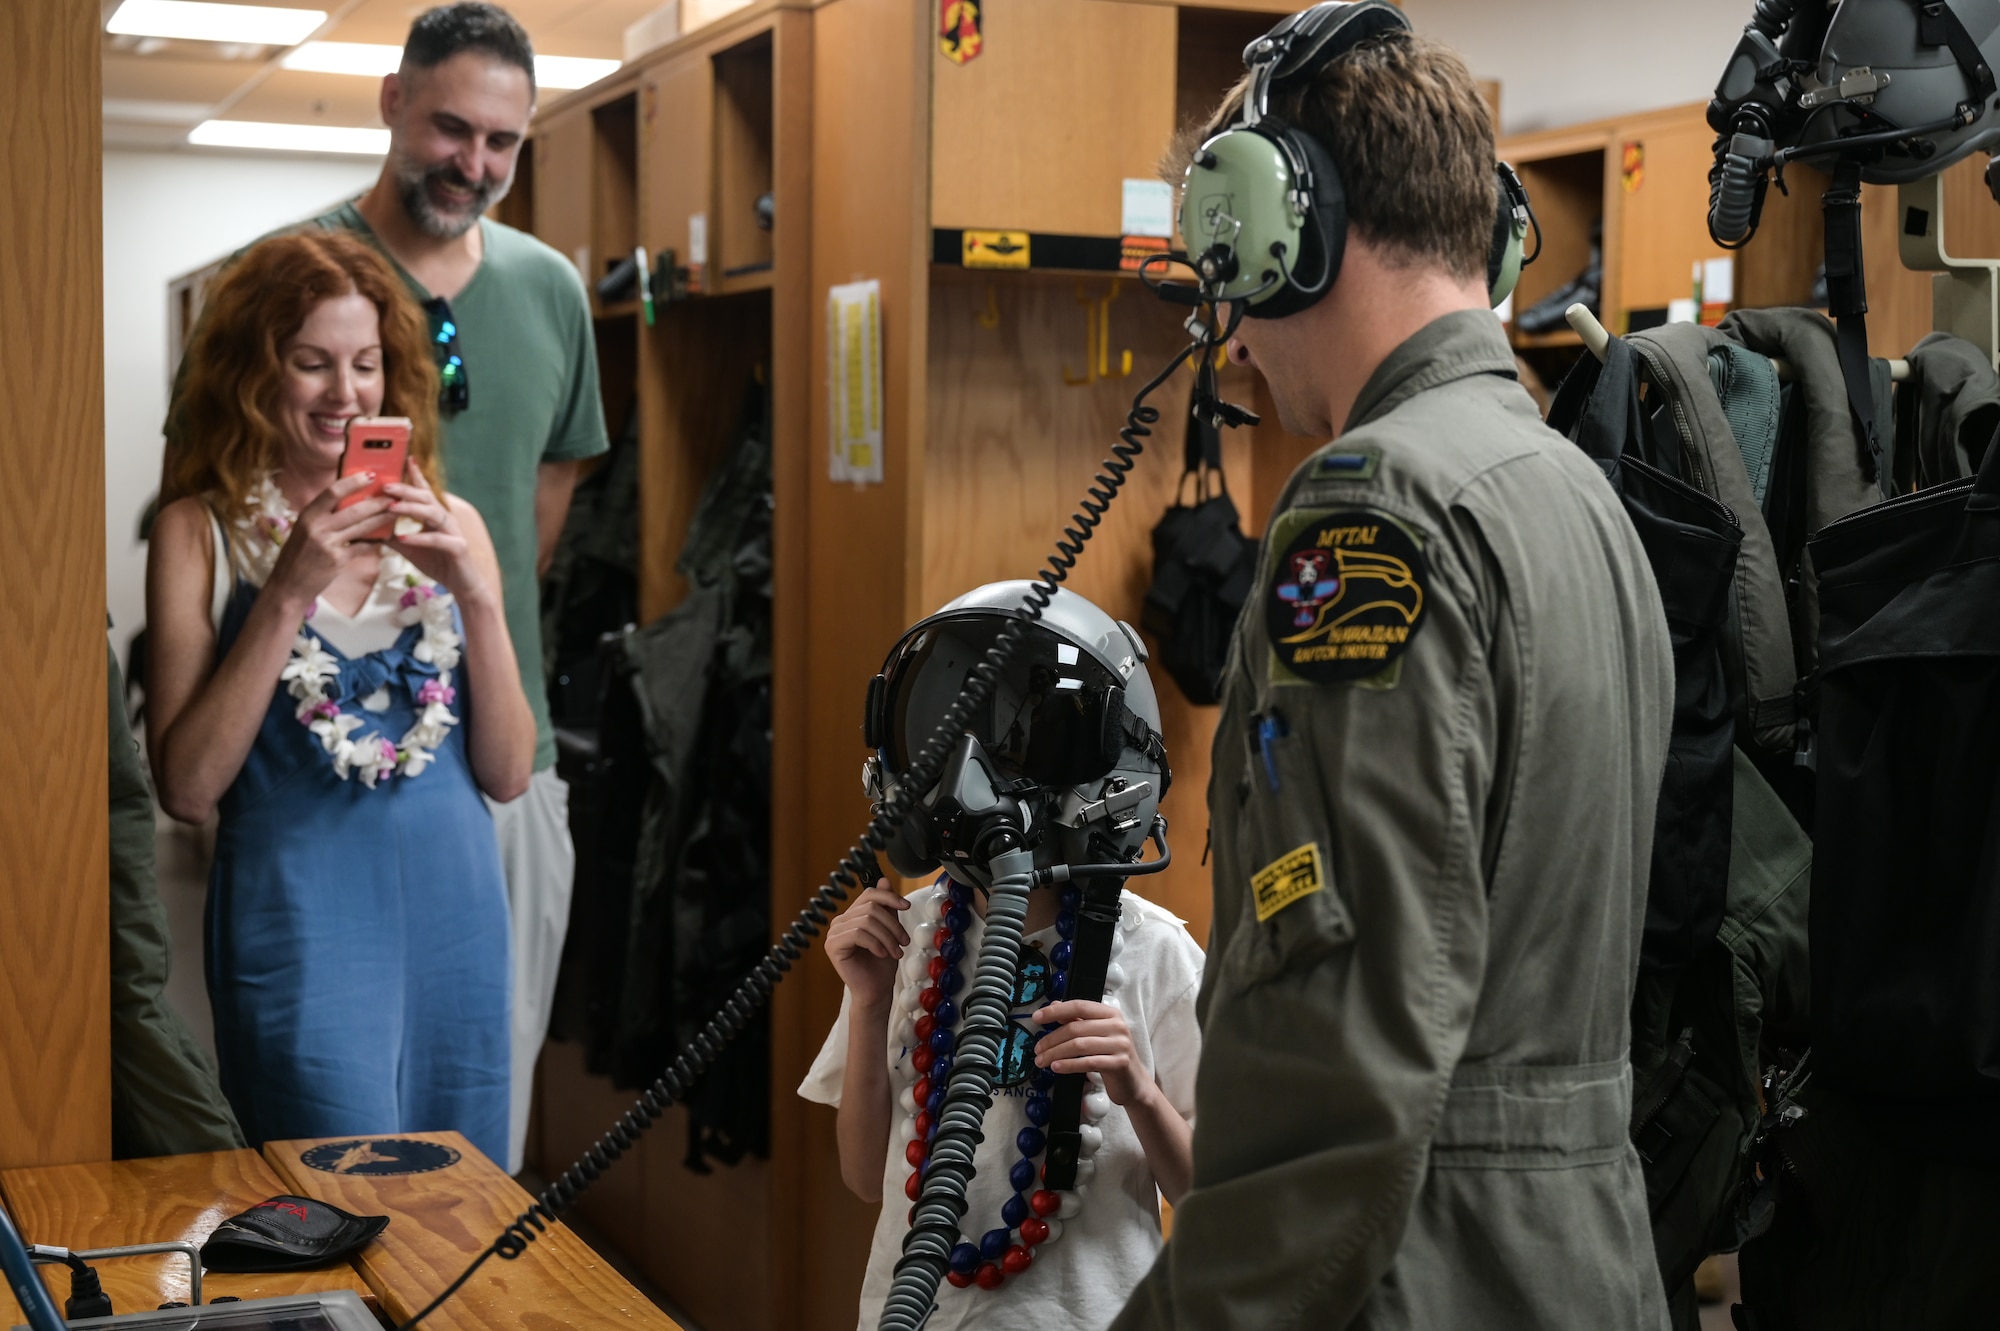 First Lt. Benjamin Peila, 199th Fighter Squadron F-22 Raptor pilot, tests the communication system inside of a pilot’s helmet with Elliott from the Make-A-Wish Foundation of Greater Los Angeles at Joint Base Pearl Harbor-Hickam, Hawaii, May 5, 2023. Peila led Elliot through a tour of the fighter squadron’s headquarters, highlighting the pilot’s gear and the F-22. (U.S. Air Force photo by Staff Sgt. Alan Ricker)